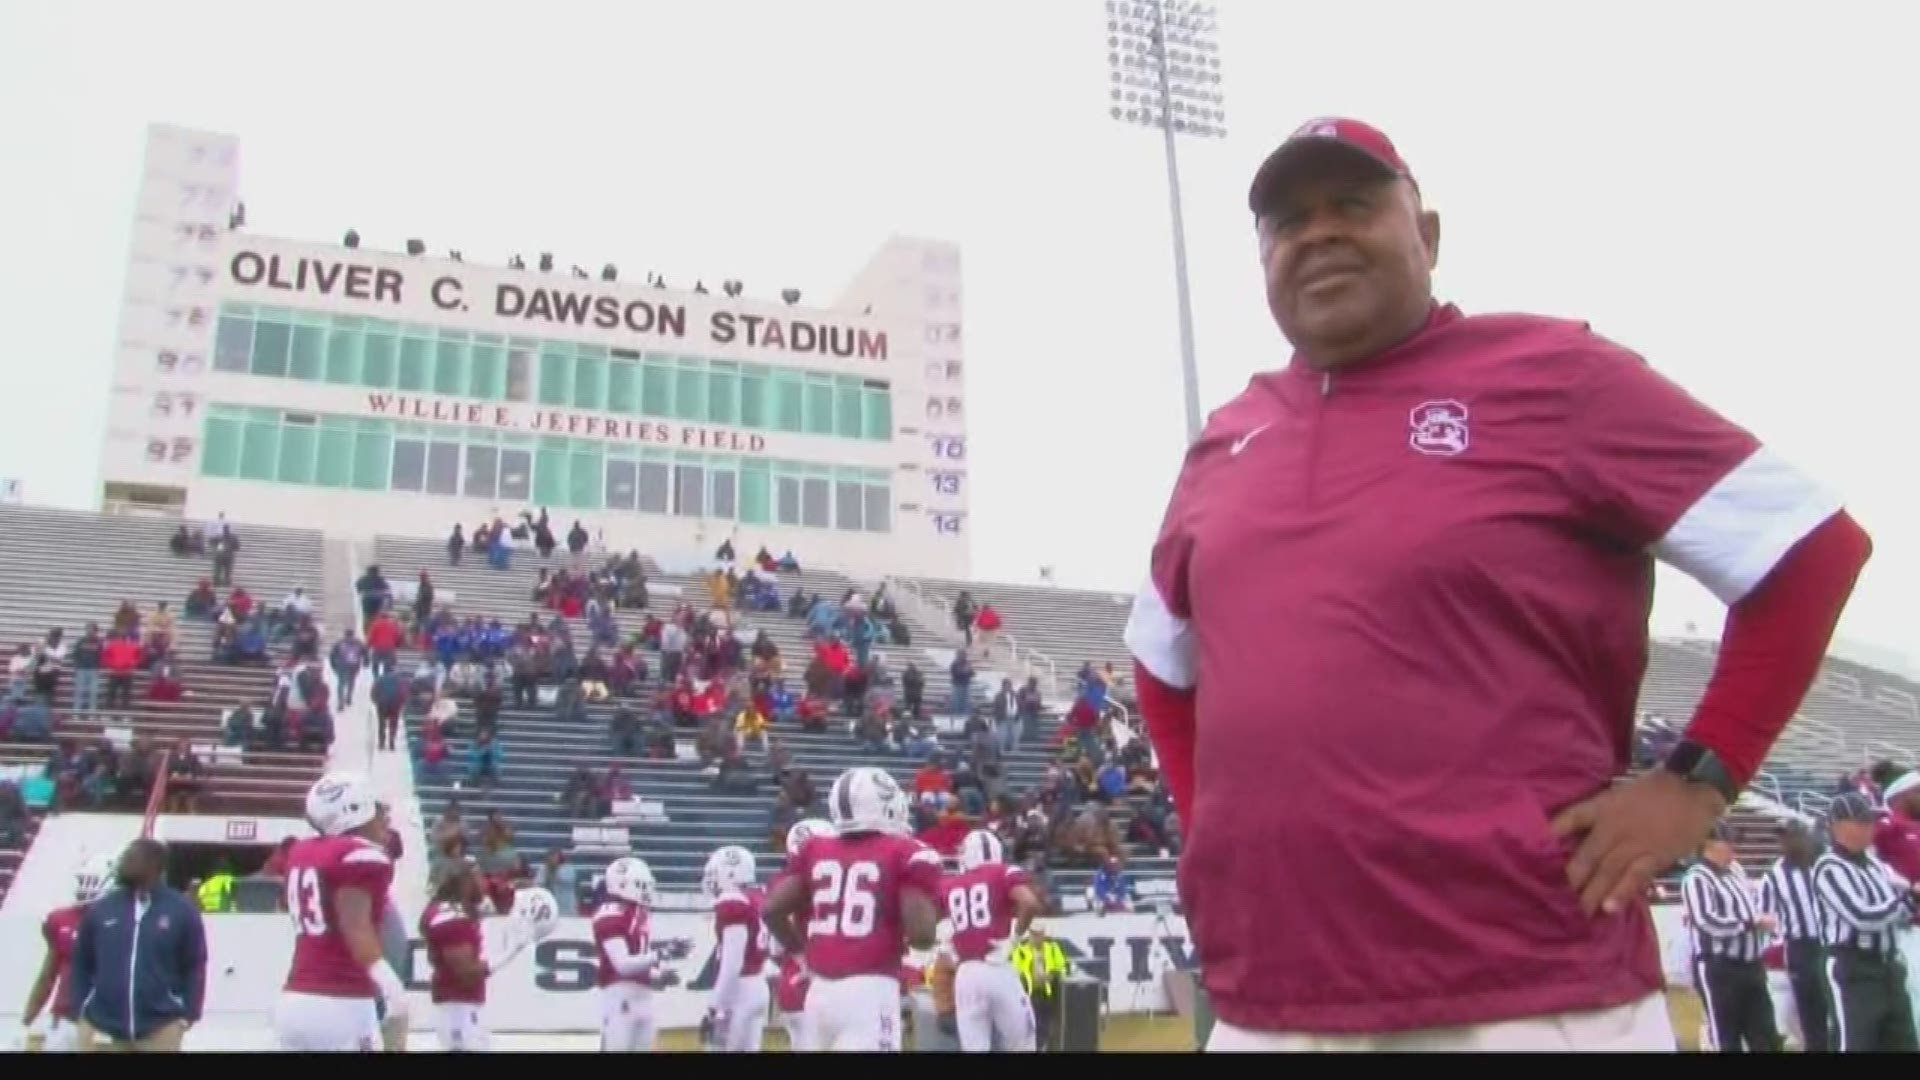 South Carolina State head football coach Buddy Pough will lead his Bulldogs onto the field Saturday to face eighth-ranked Wofford in Orangeburg.